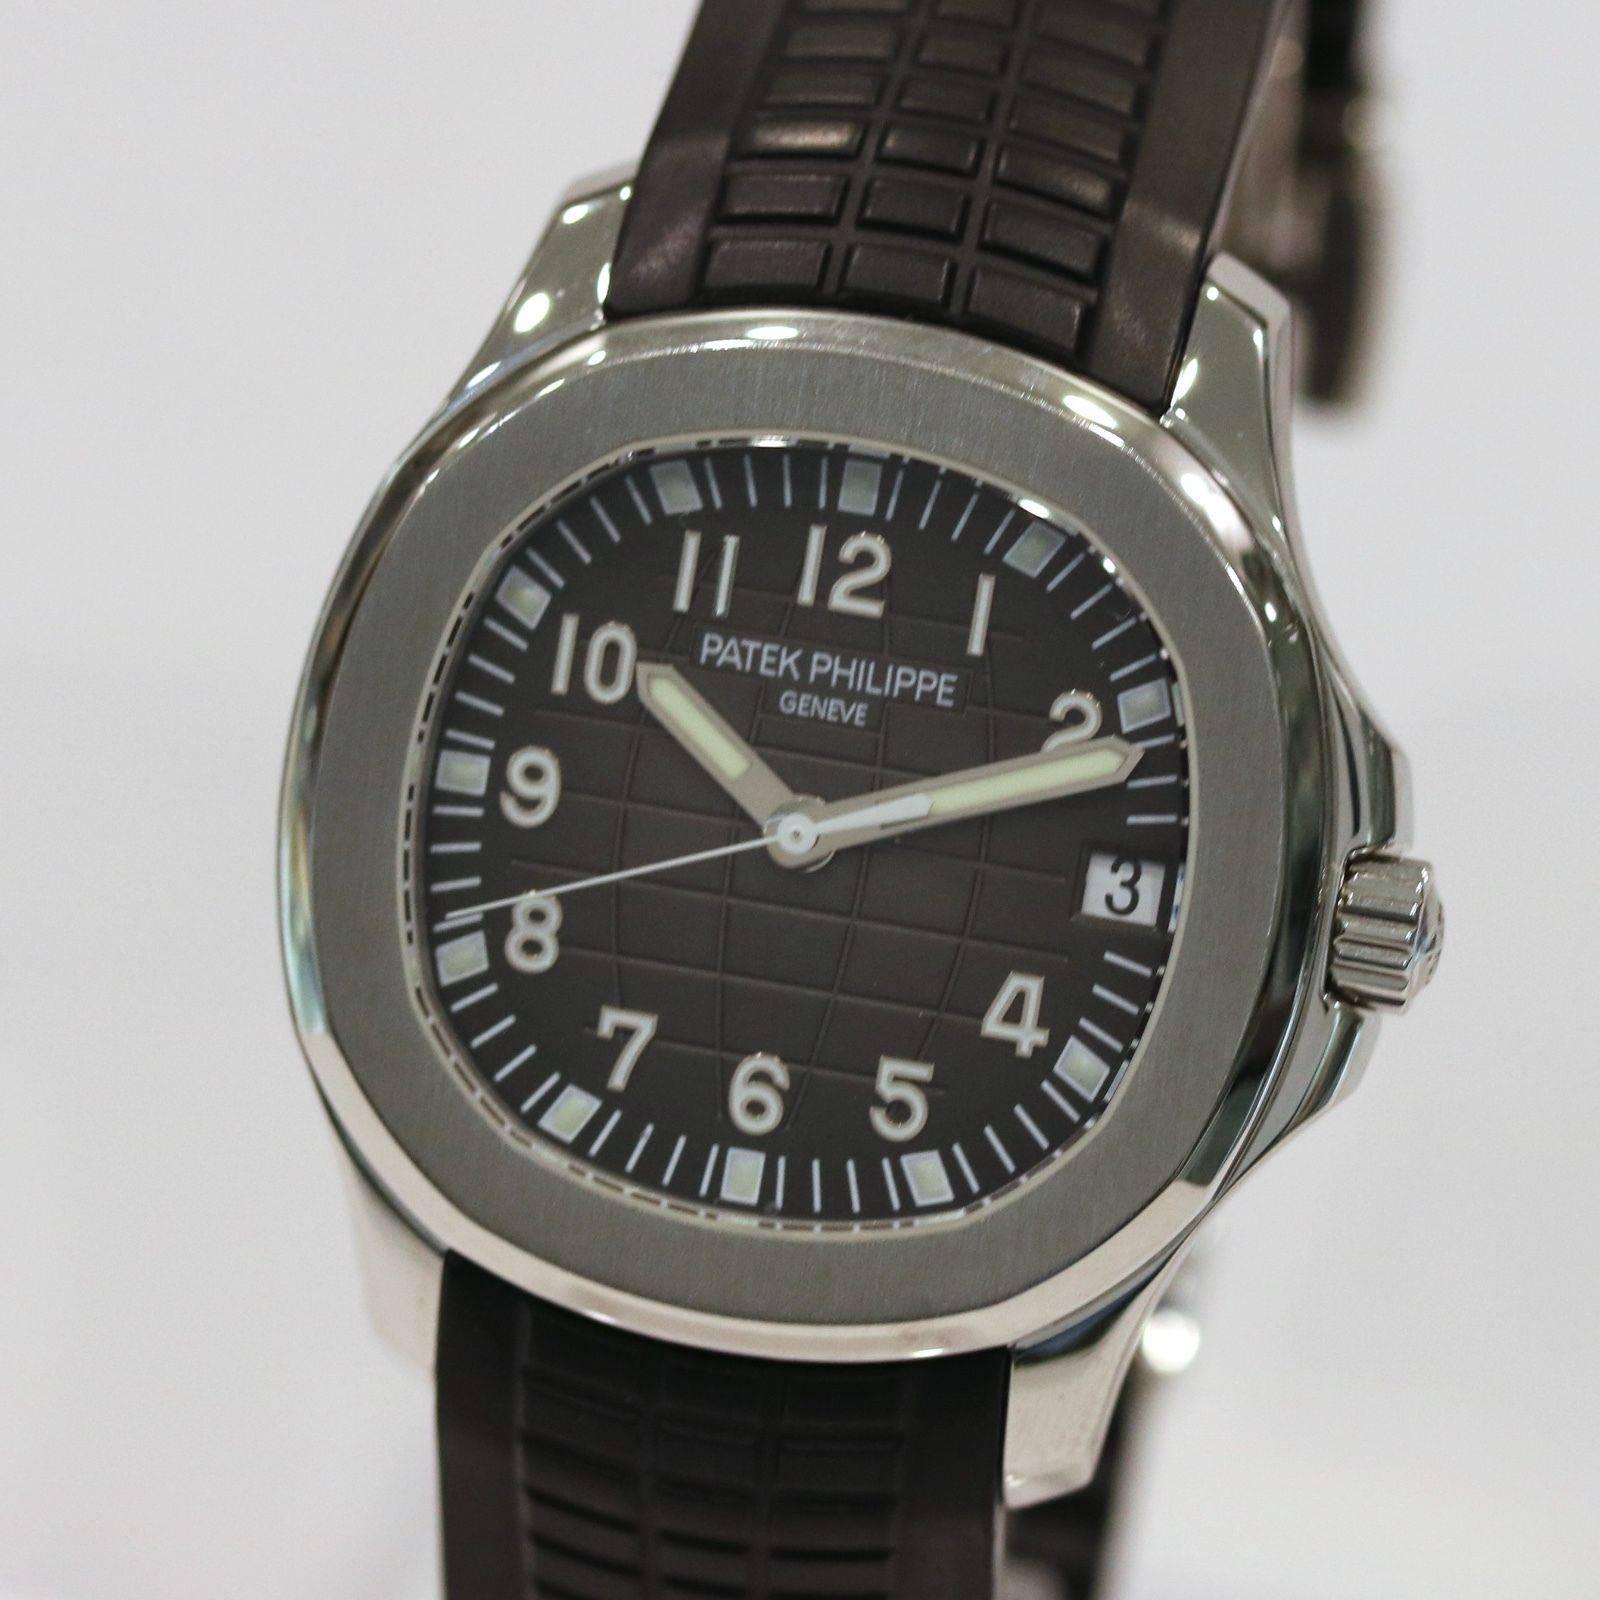 Women's or Men's Patek Philippe Stainless Steel Aquanaut Automatic Wristwatch Ref 5165a-001